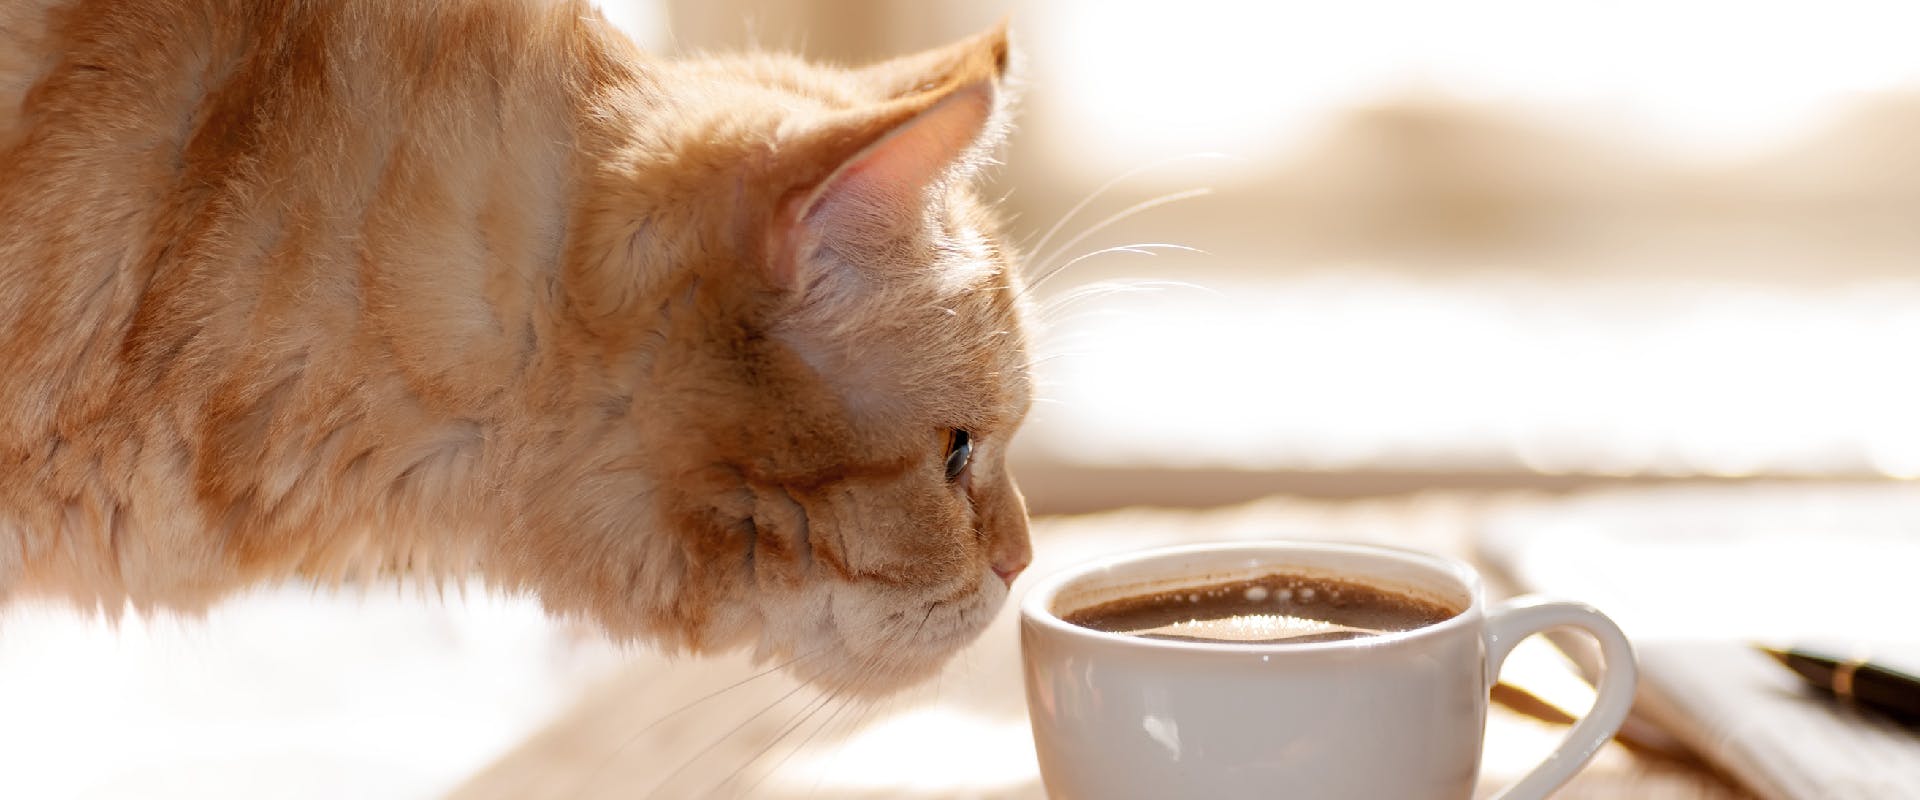 A cat sniffs at a cup of coffee.